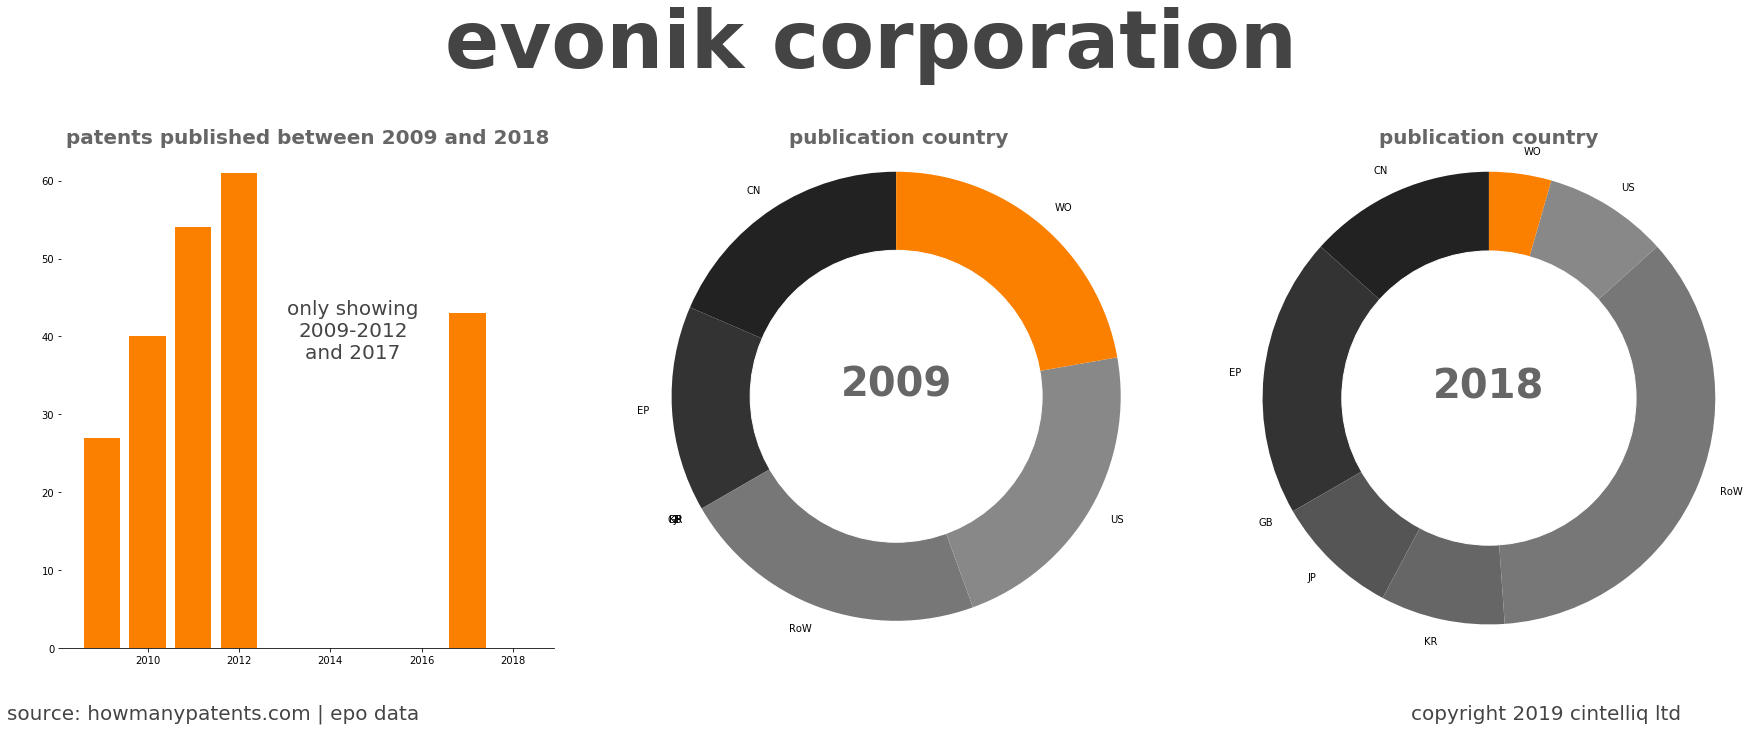 summary of patents for Evonik Corporation